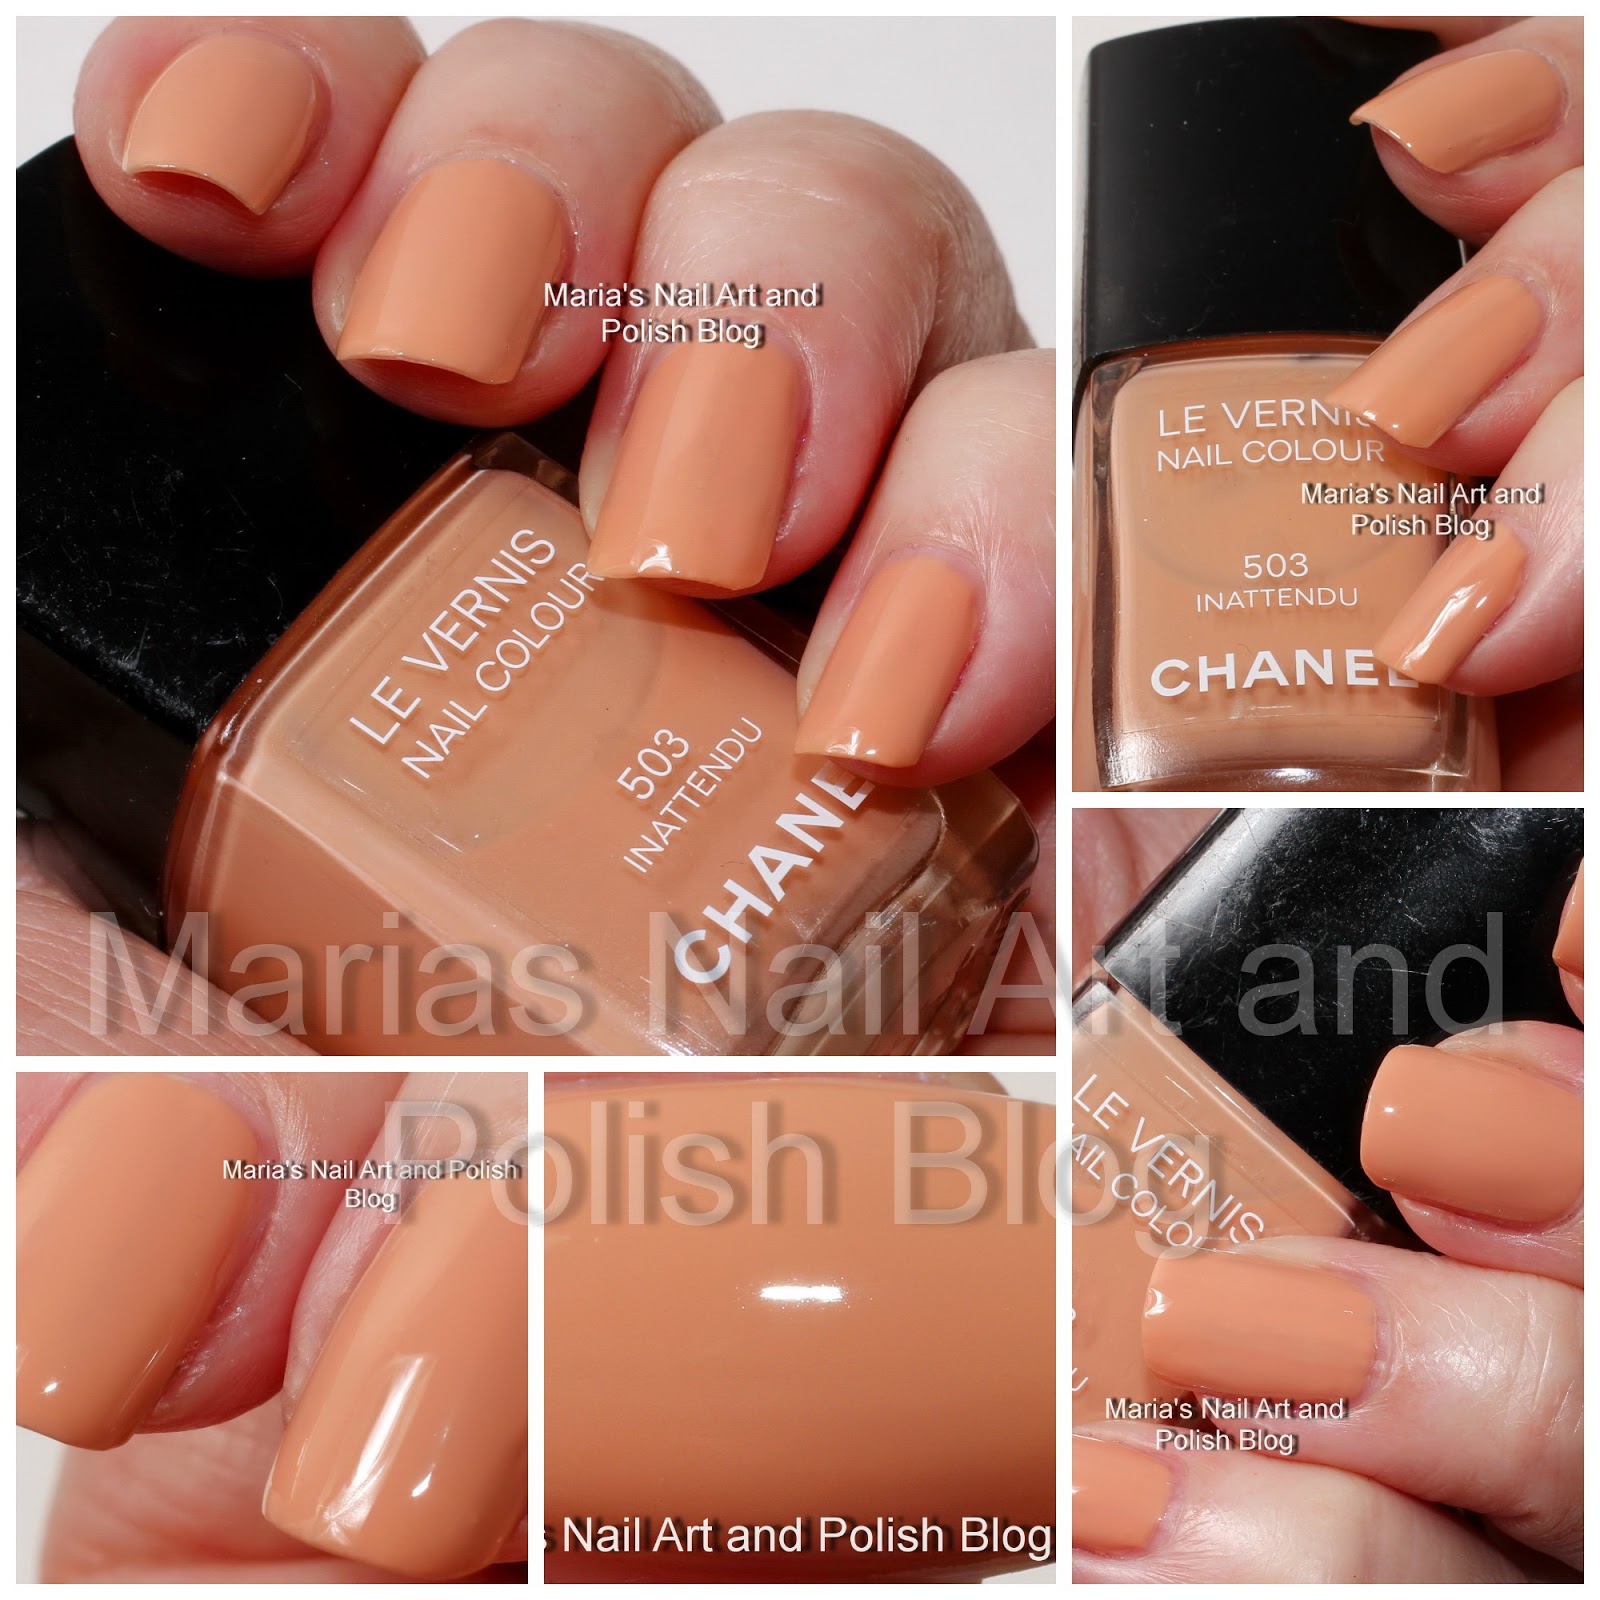 The Chanel Les Impressions Nail Polishes and My Thursday Manicure